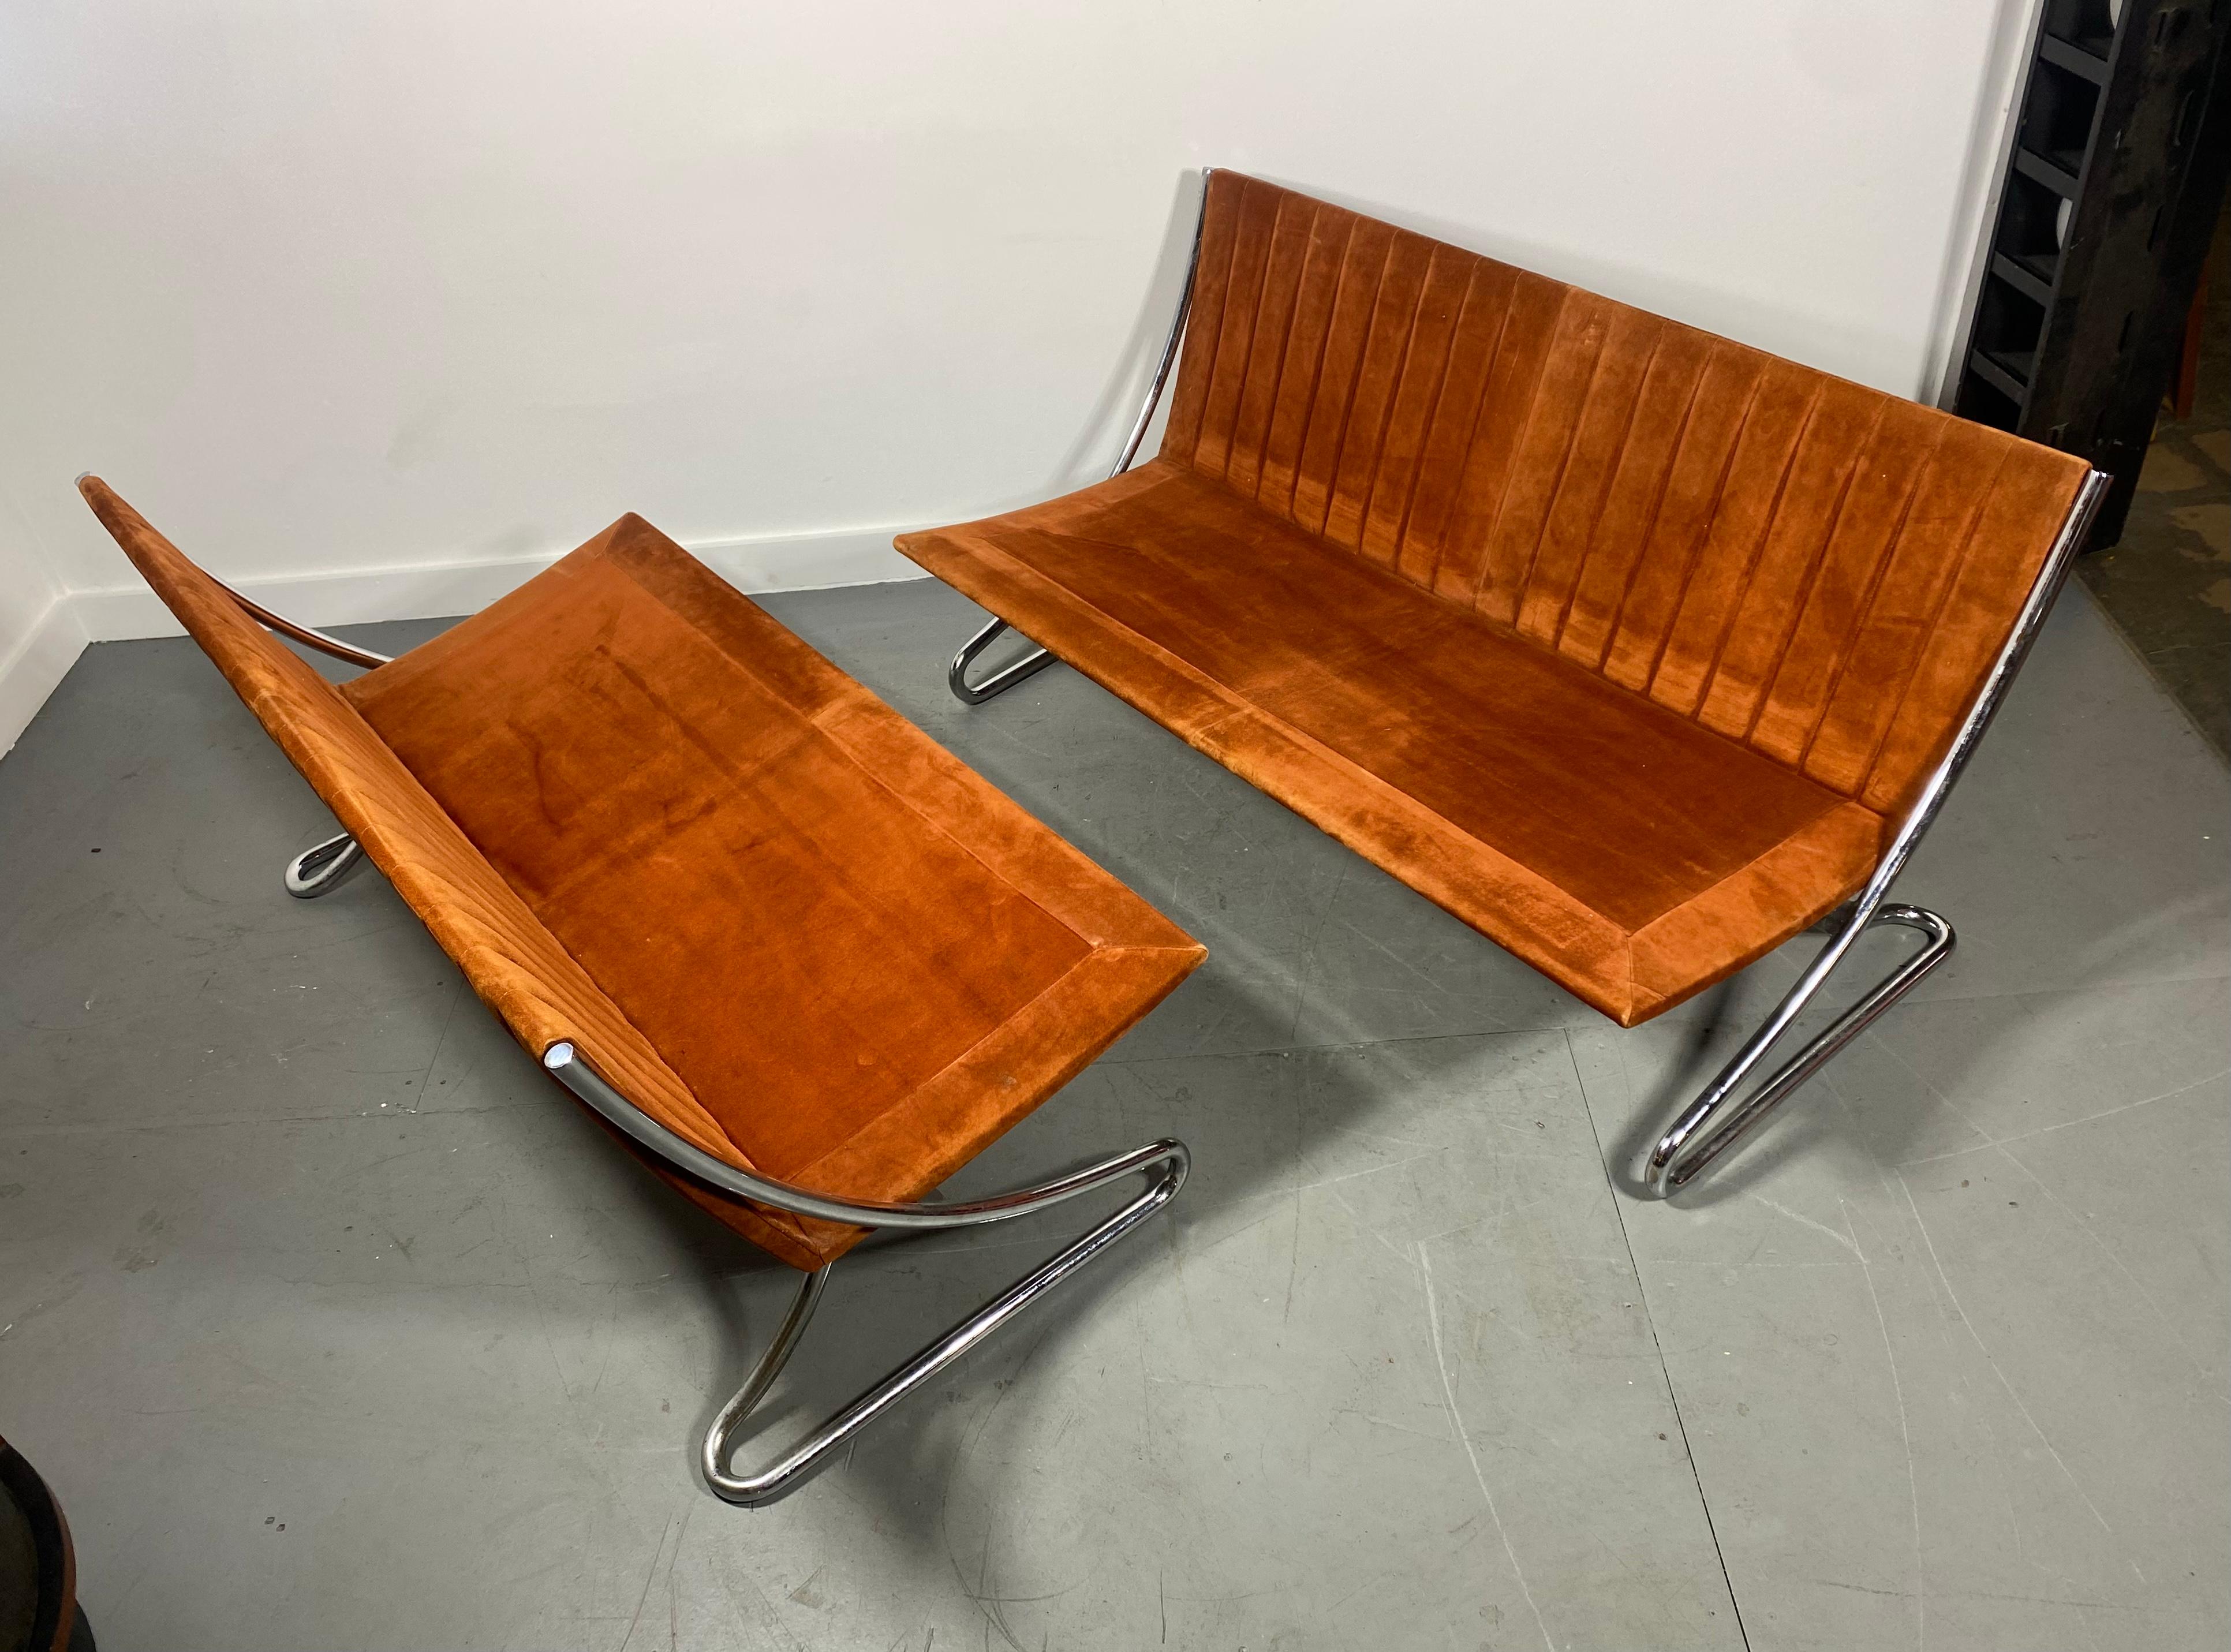 Canadian Leif Jacobsen Sette's Steel Frames & Suede Ribbed Upholstery, Modern / Spaceage